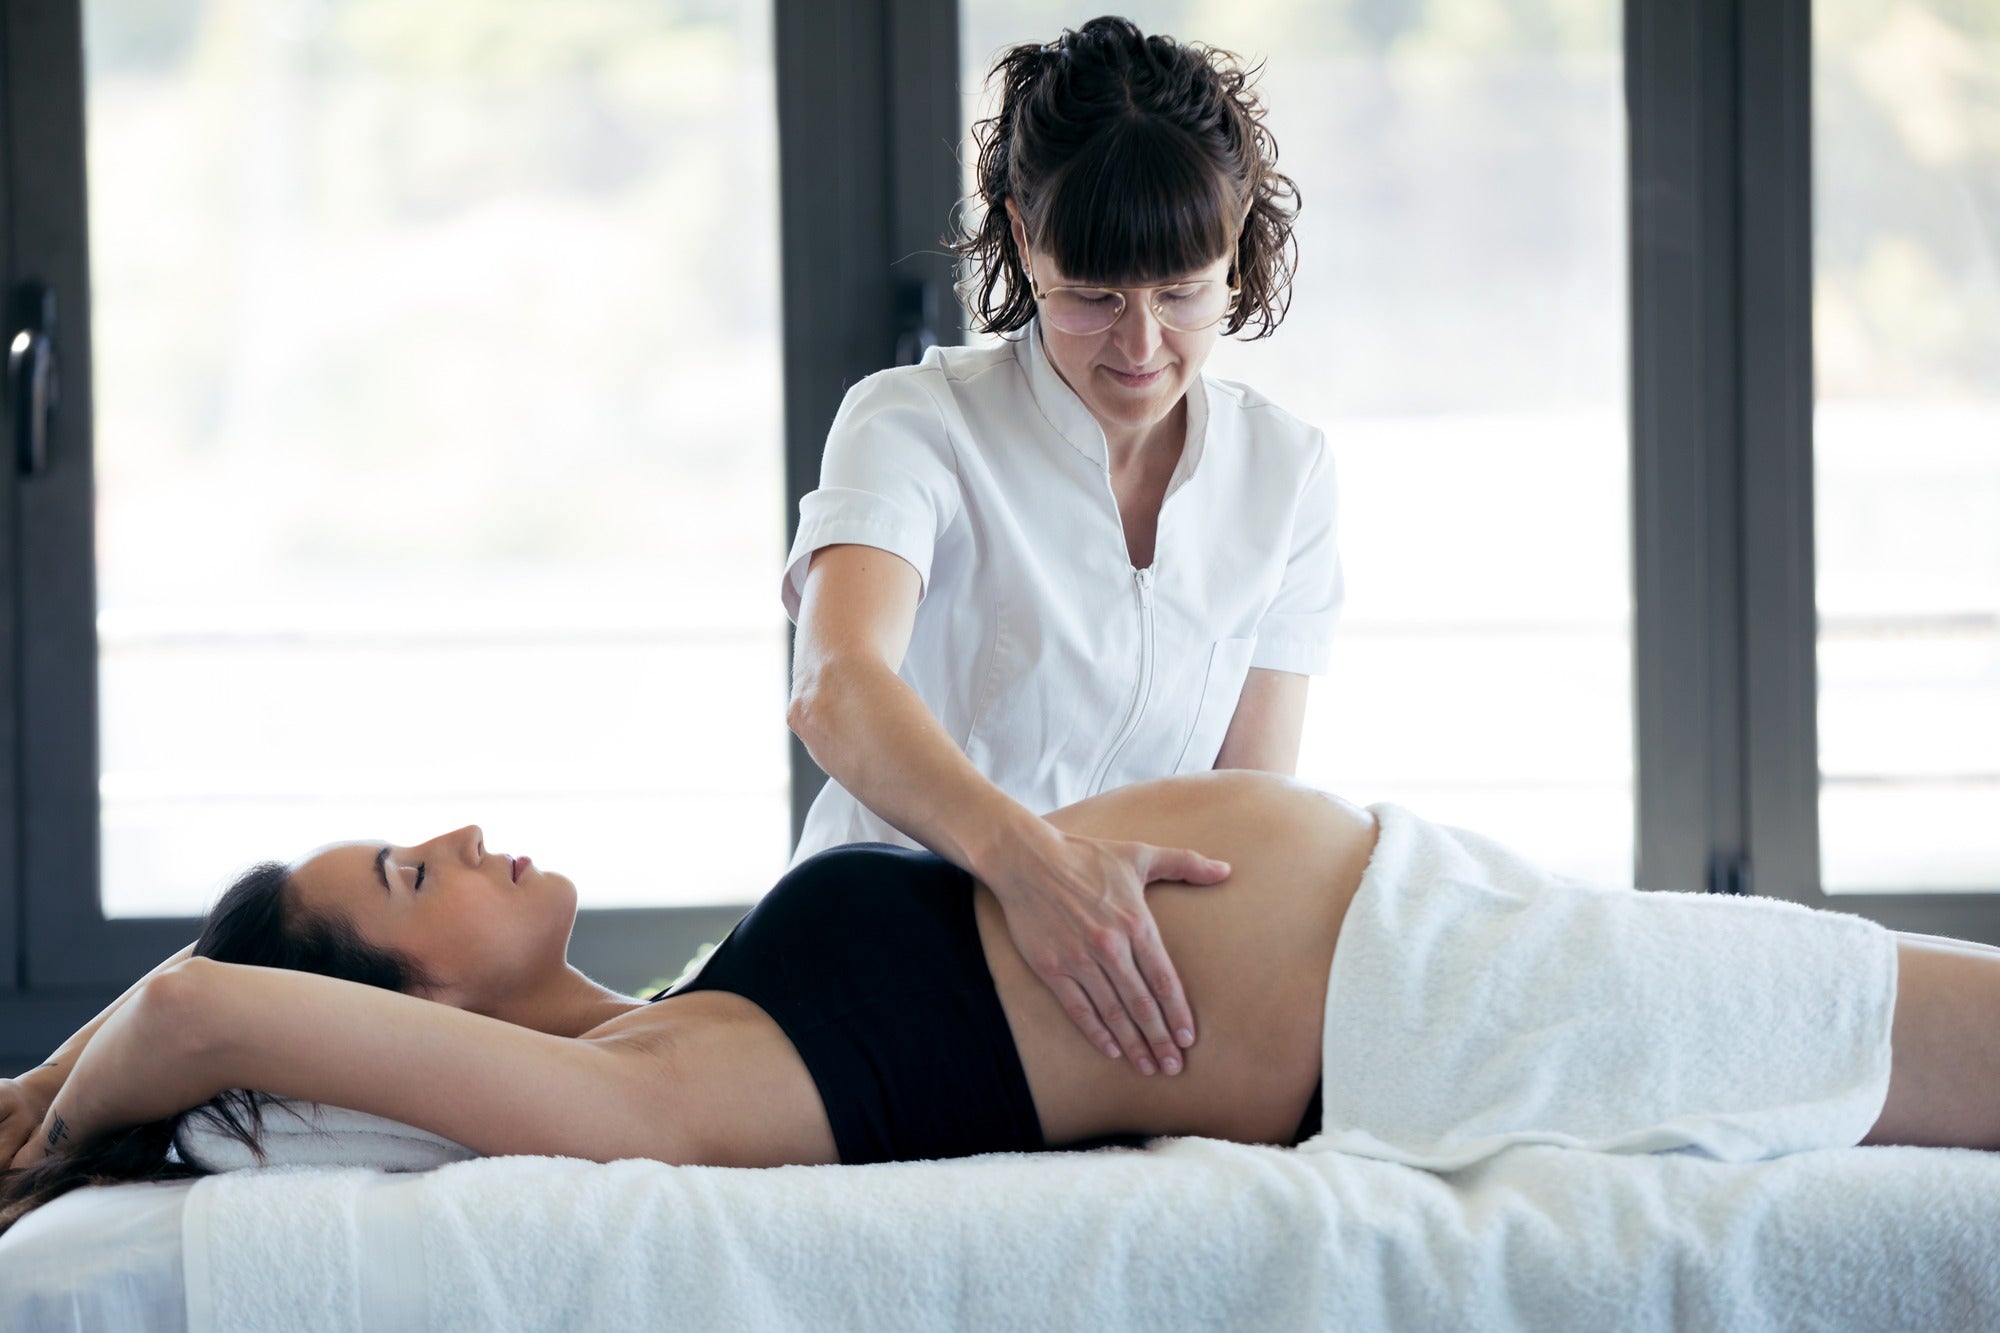 Home spa session: Pregnant woman enjoying a professional prenatal massage therapy at home.